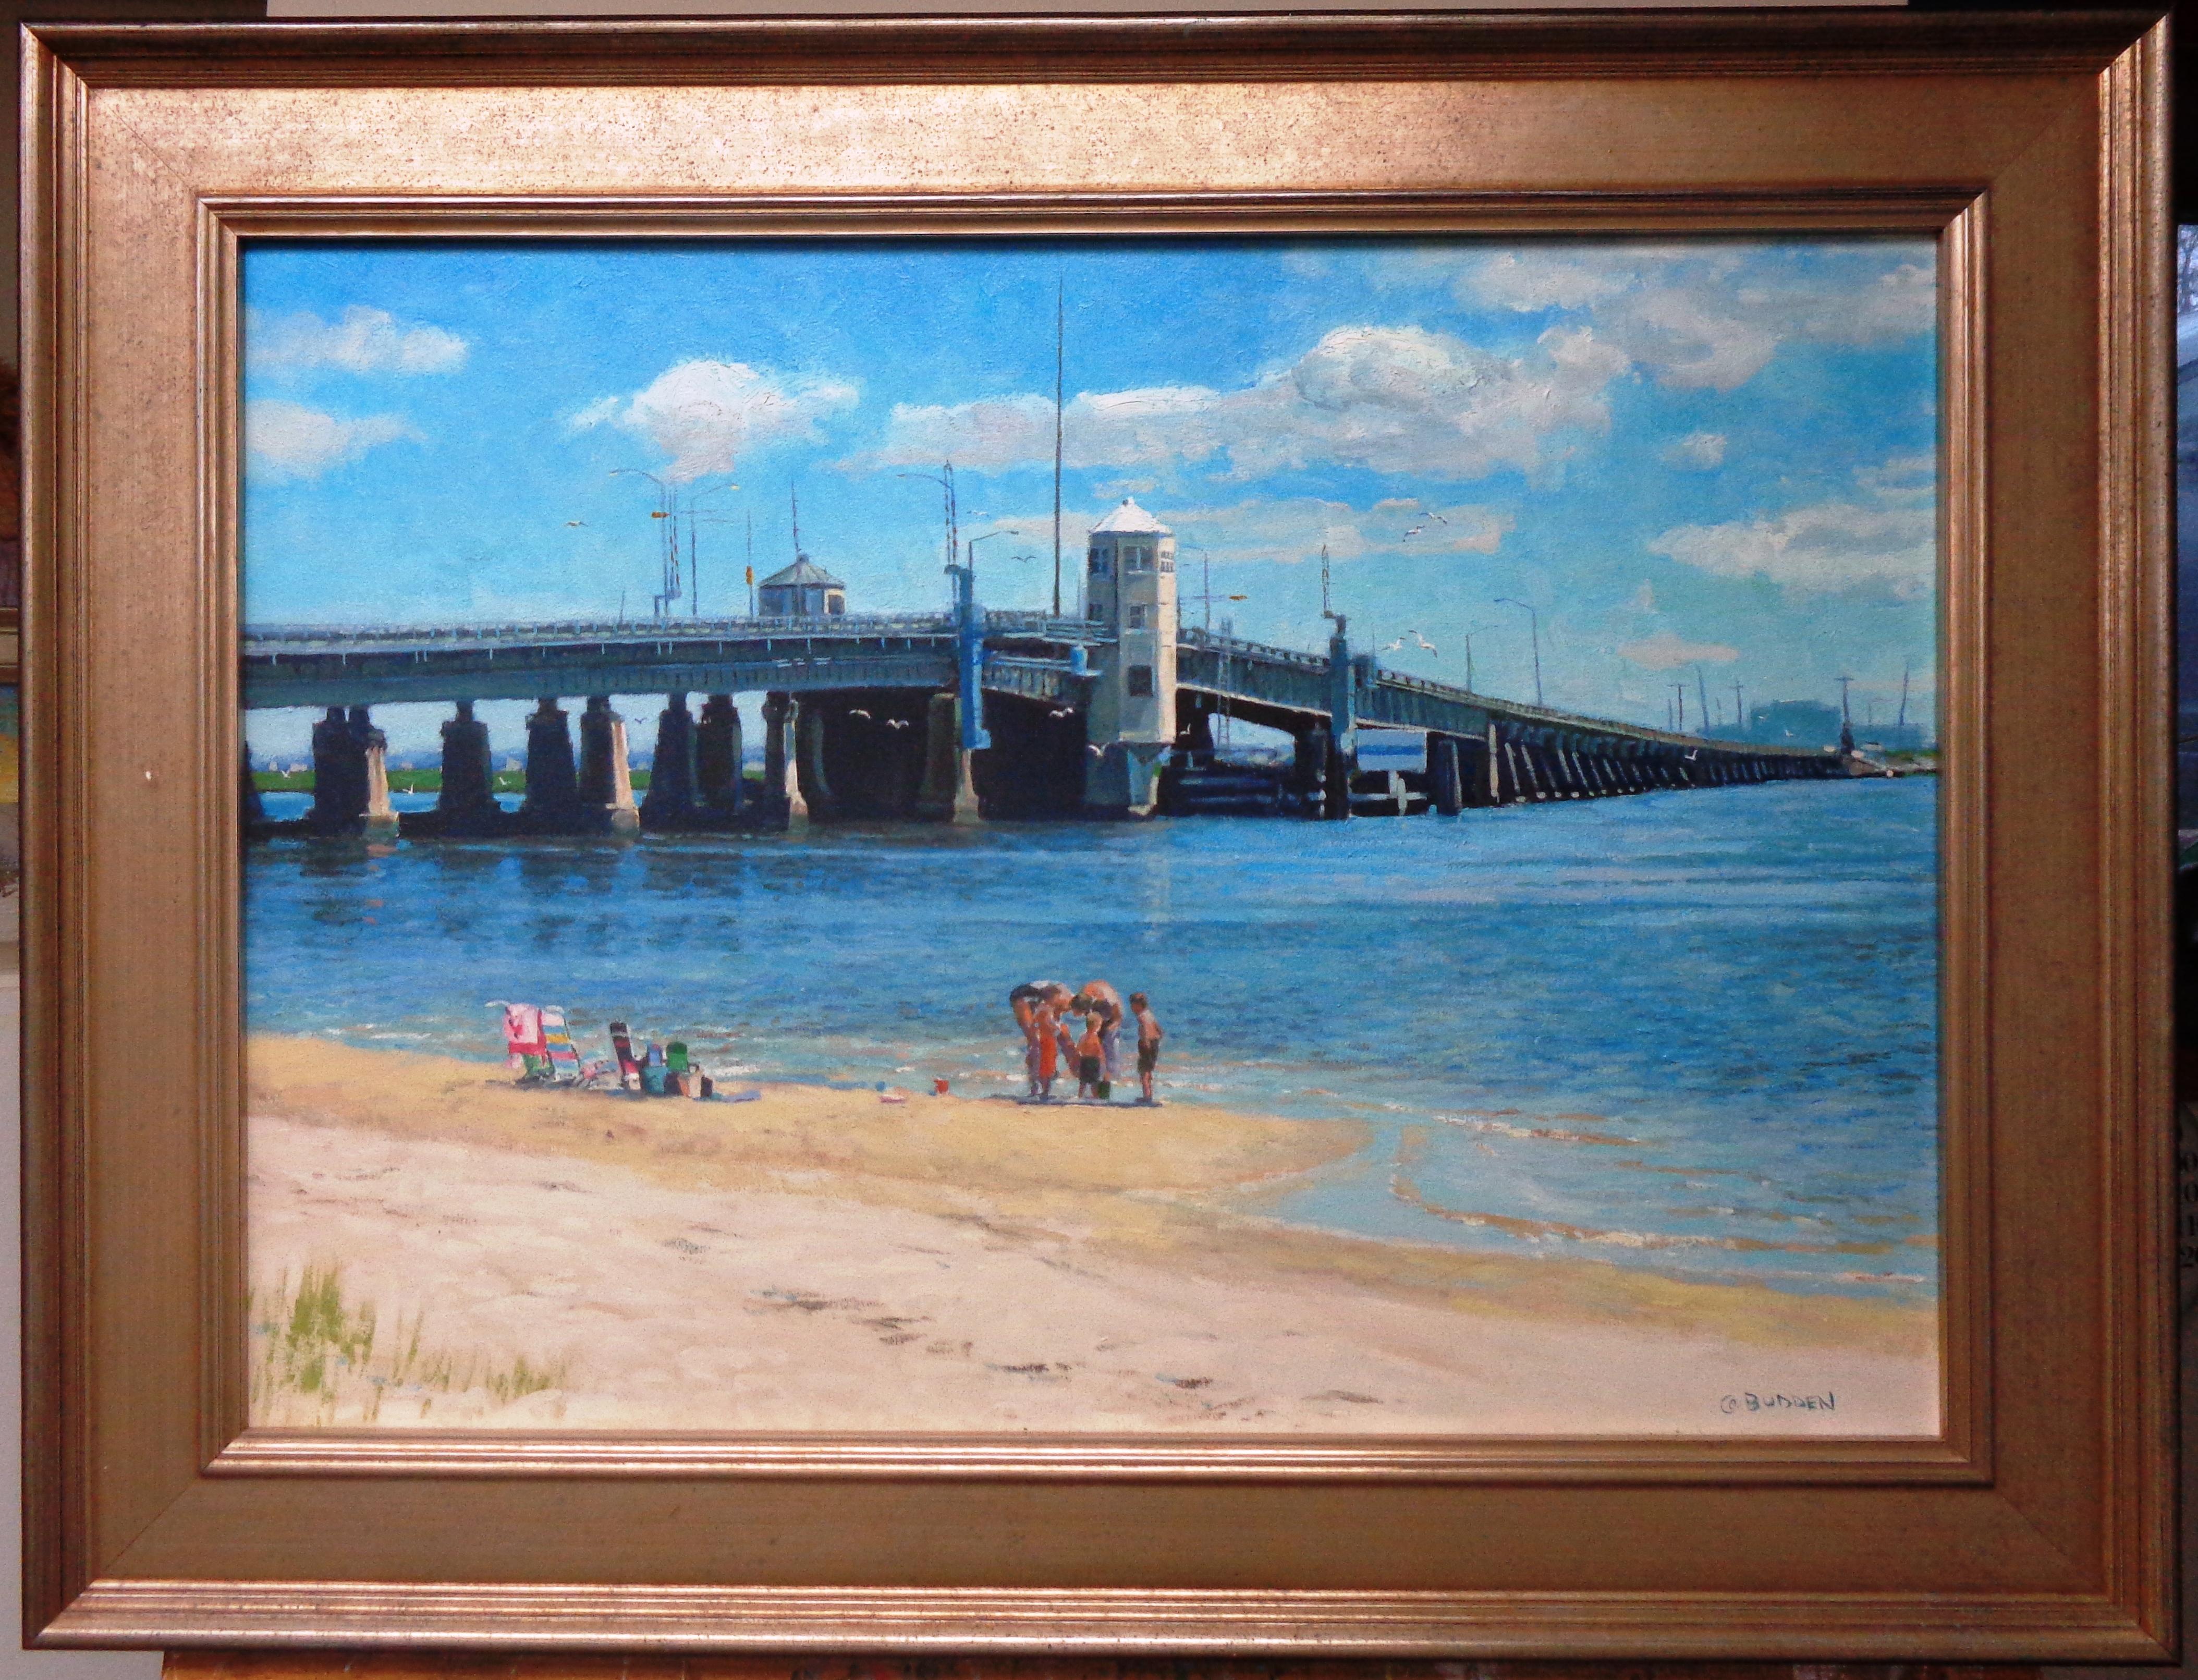 Original Summers Point Bridge to Ocean City, NJ
oil/canvas
20 x 28 image size 26 x 34 framed (frame shows some age with marks, etc)
An oil painting on canvas by award winning contemporary artist Michael Budden that showcases a unique composition of 